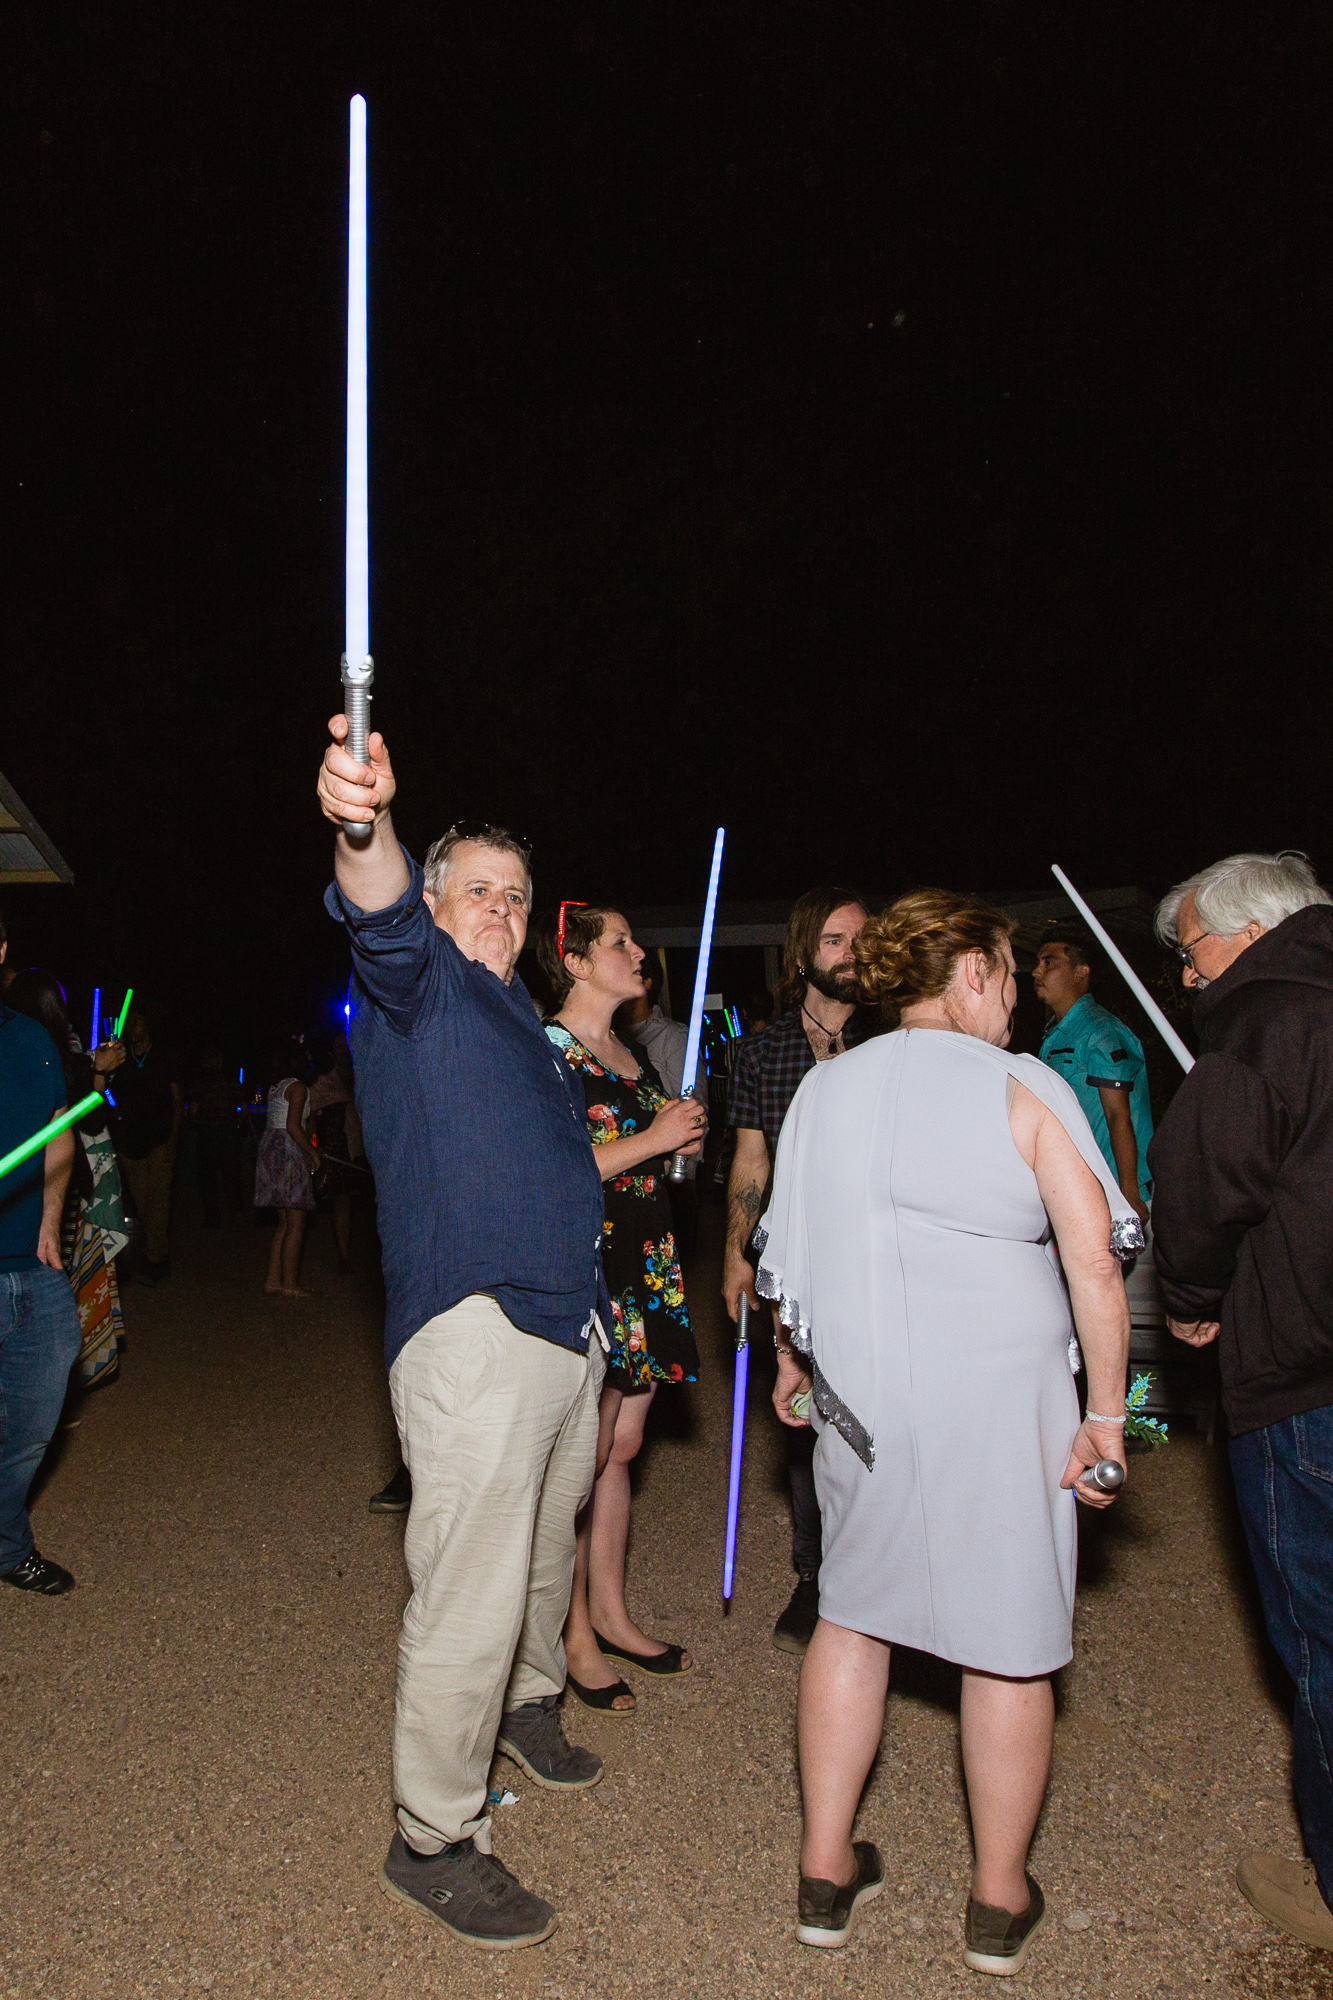 Father of the groom holding a lightsaber at a wedding reception by wedding photographer PMA Photography.